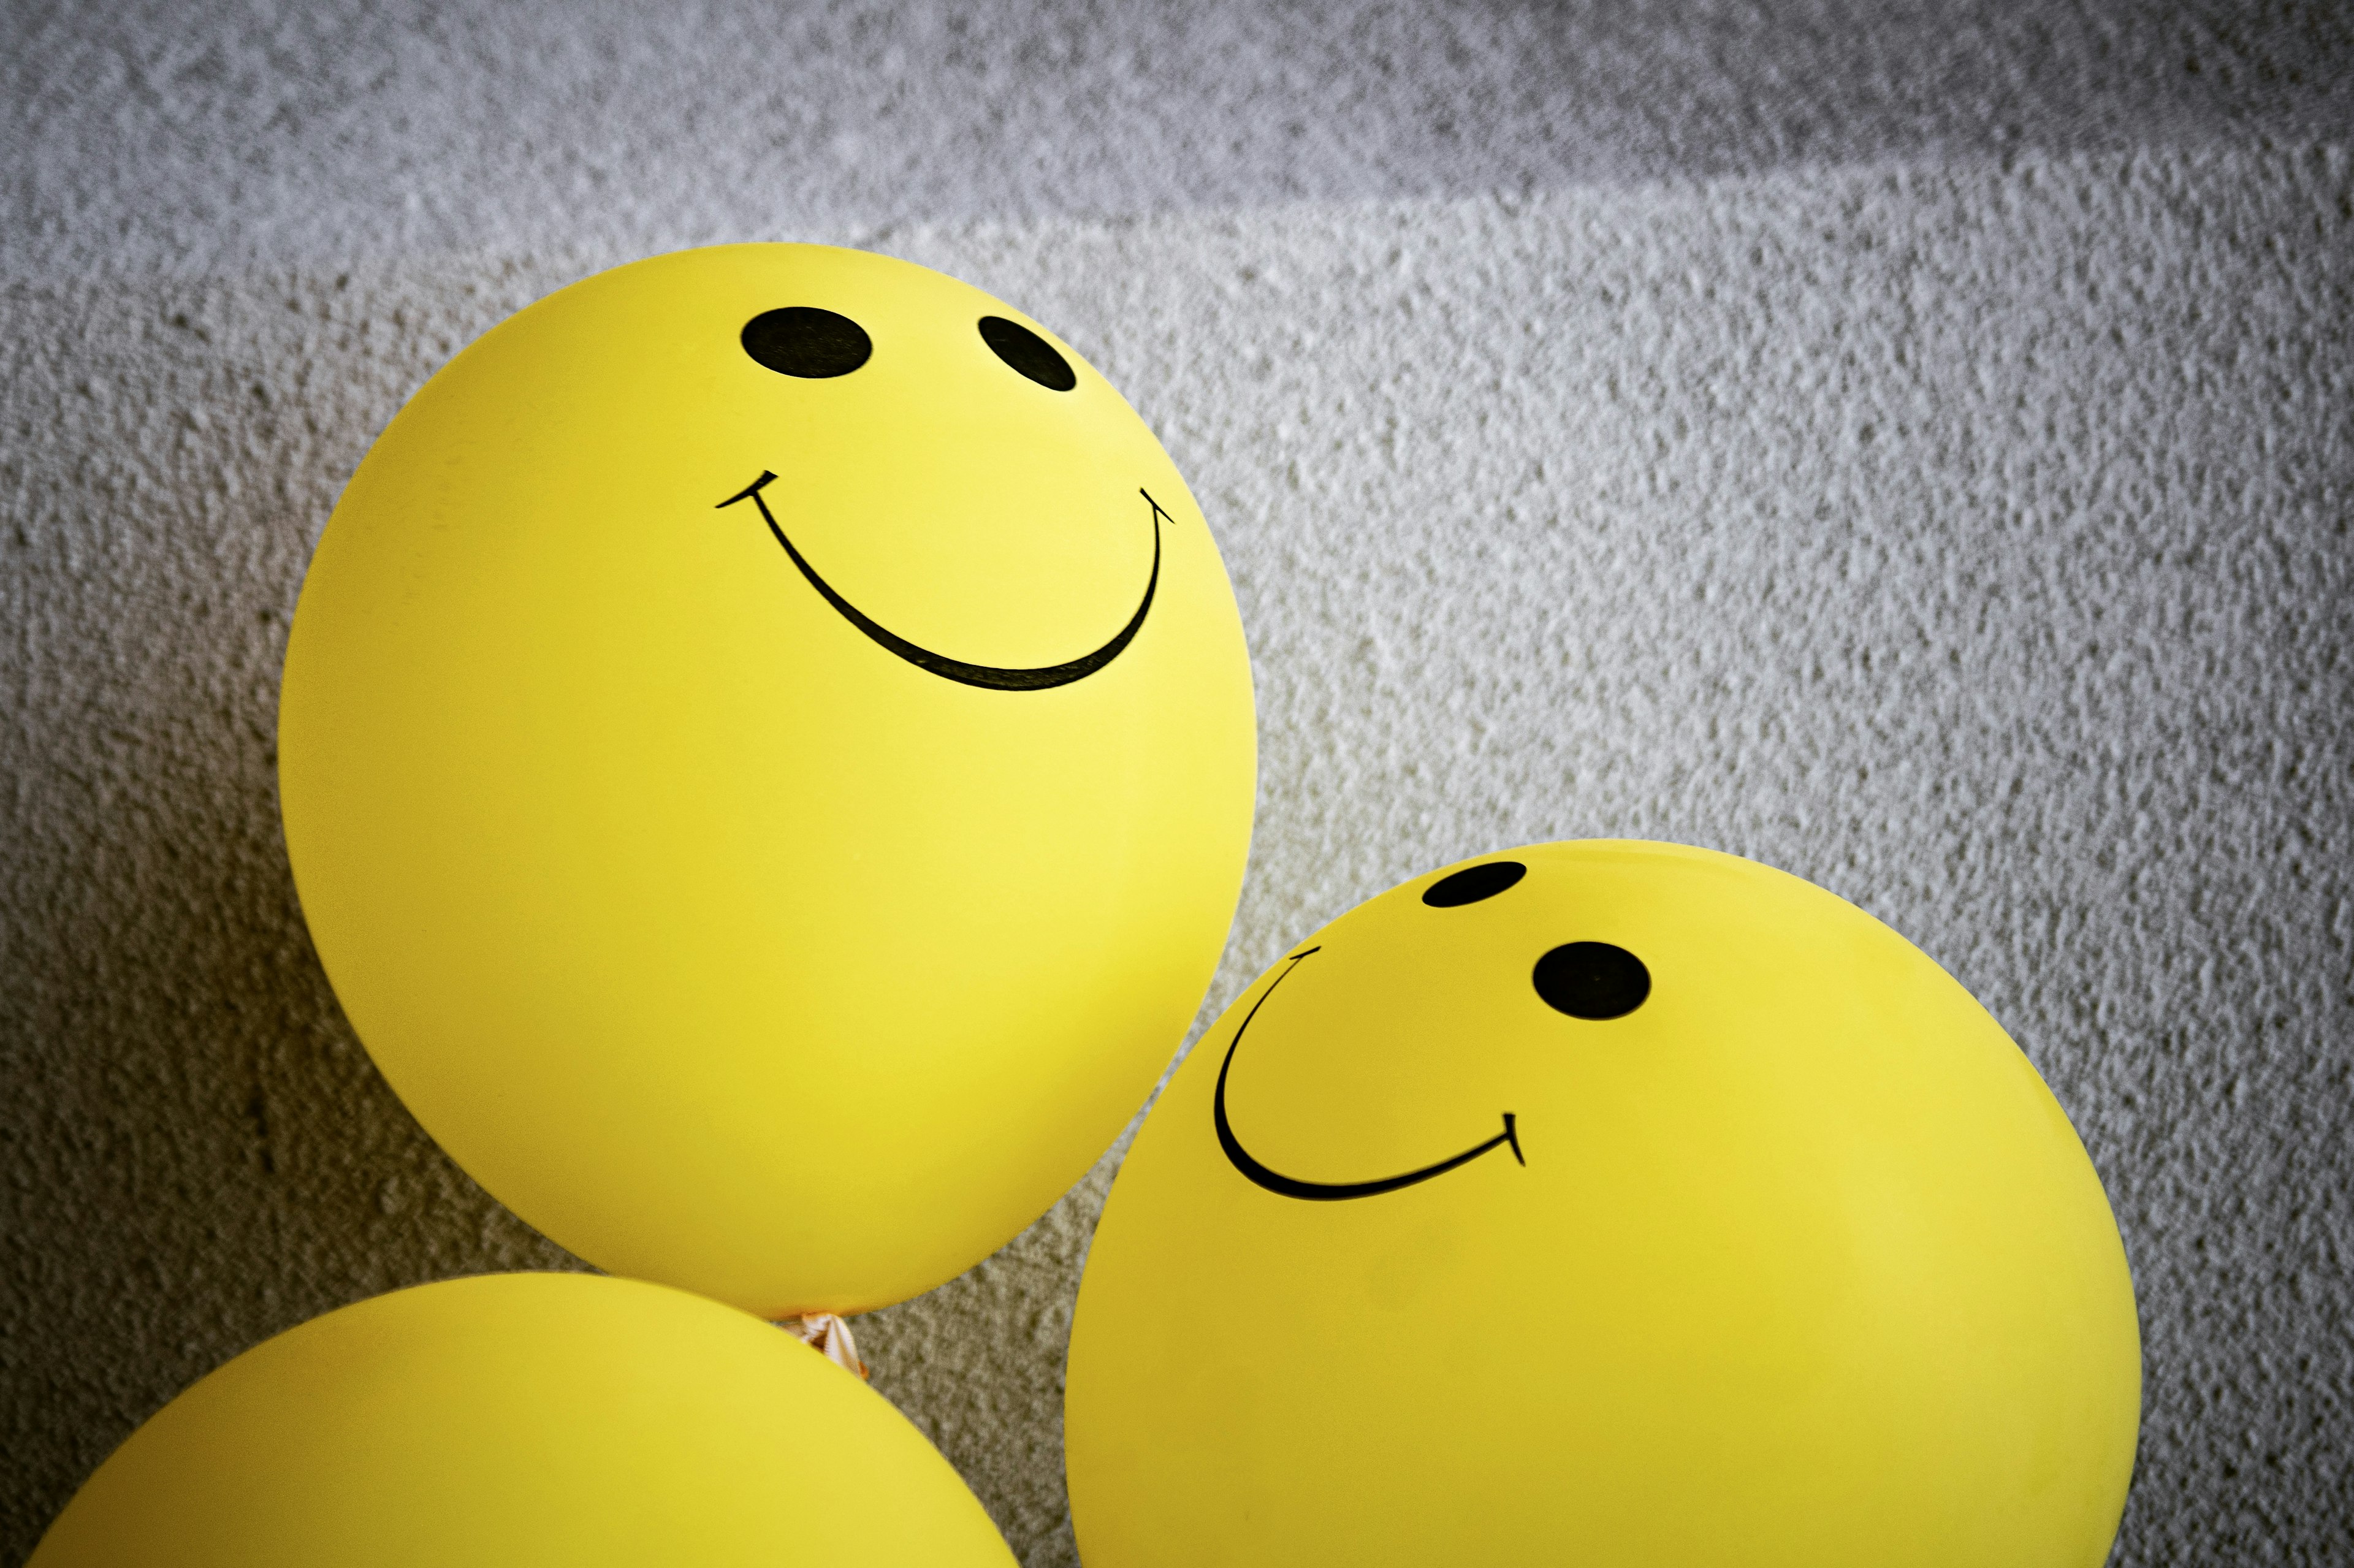 Balloons with happy faces